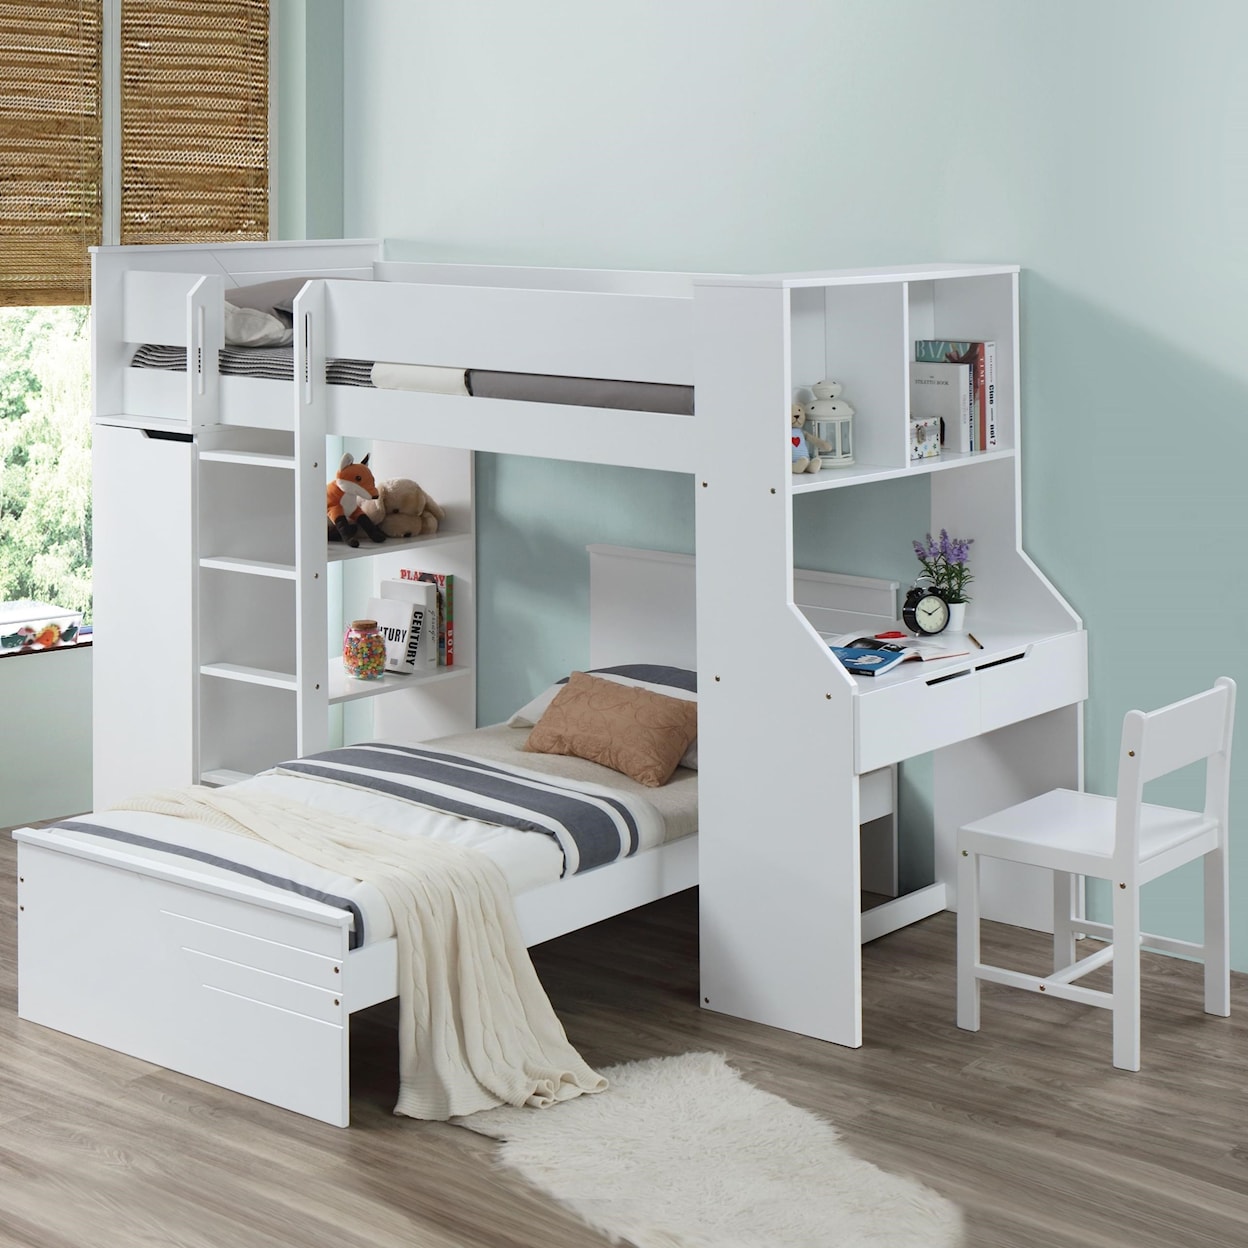 Acme Furniture Ragna Twin Bed Room Group